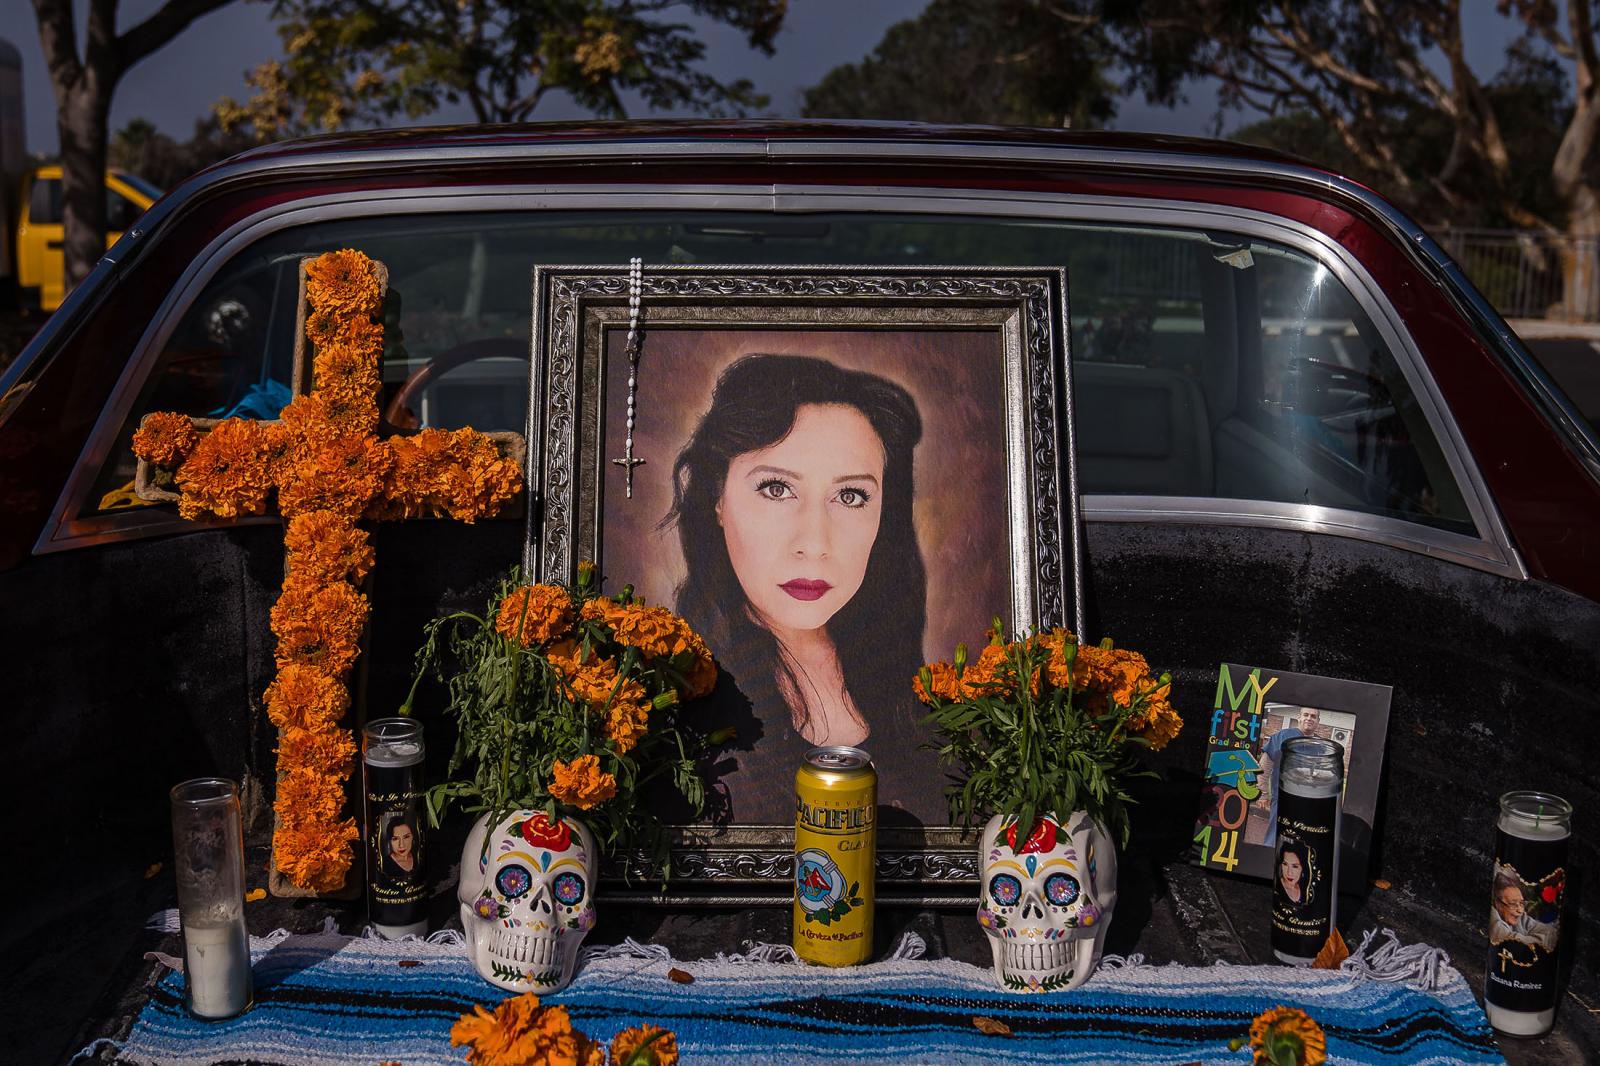 A photo of Sandra Ramirez is displayed in an altar in the back of a classic car at the 8th Annual Encinitas Day of the Dead Festival on October 30, 2021 in Encinitas, Calif.